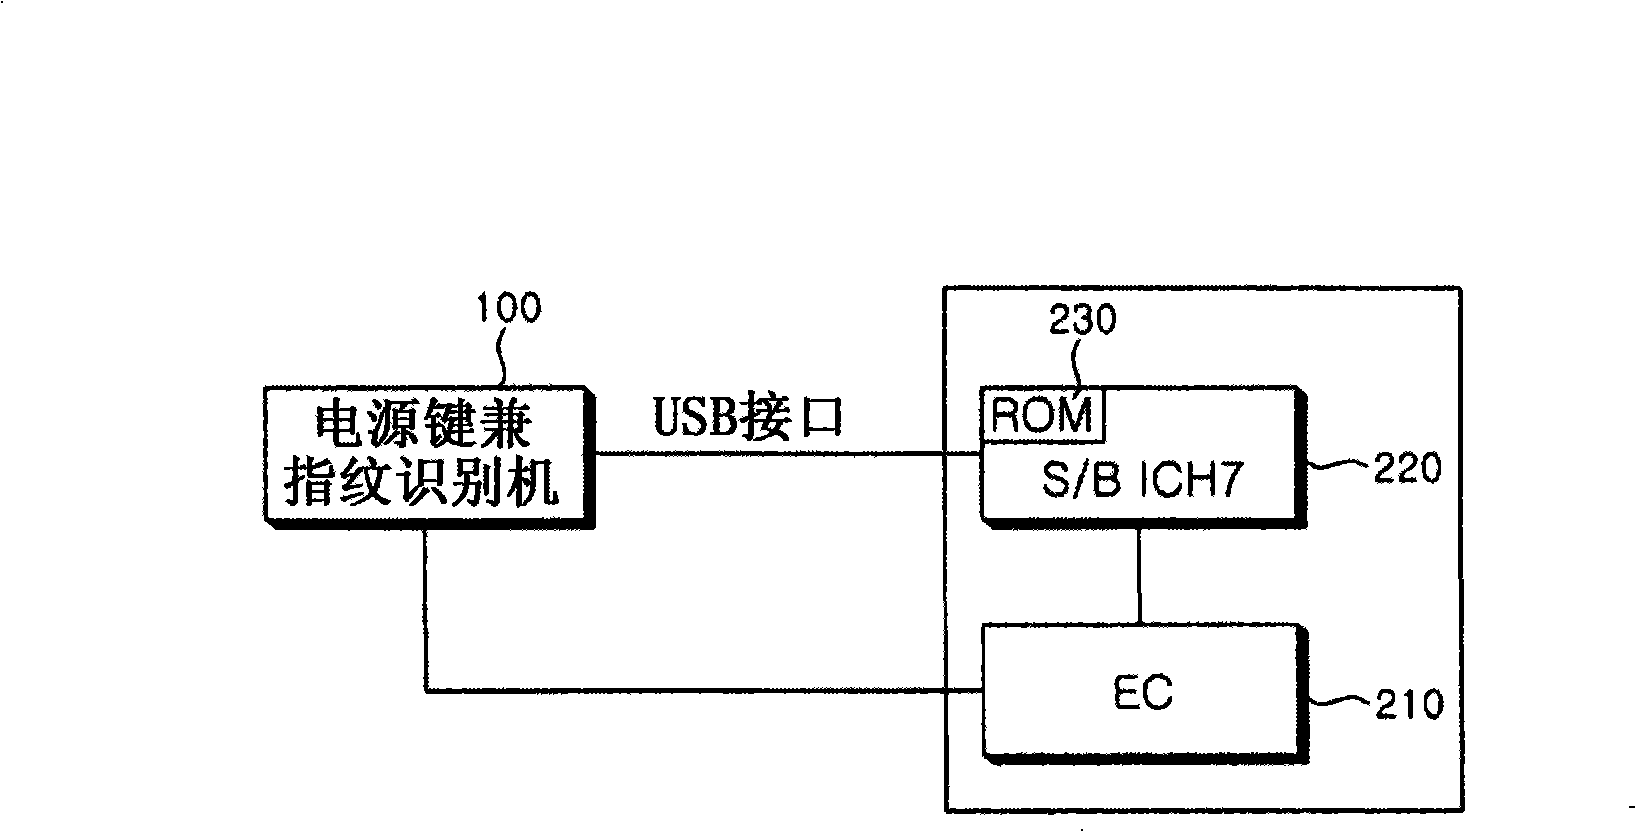 Validation device and method for start and use of computer power supply